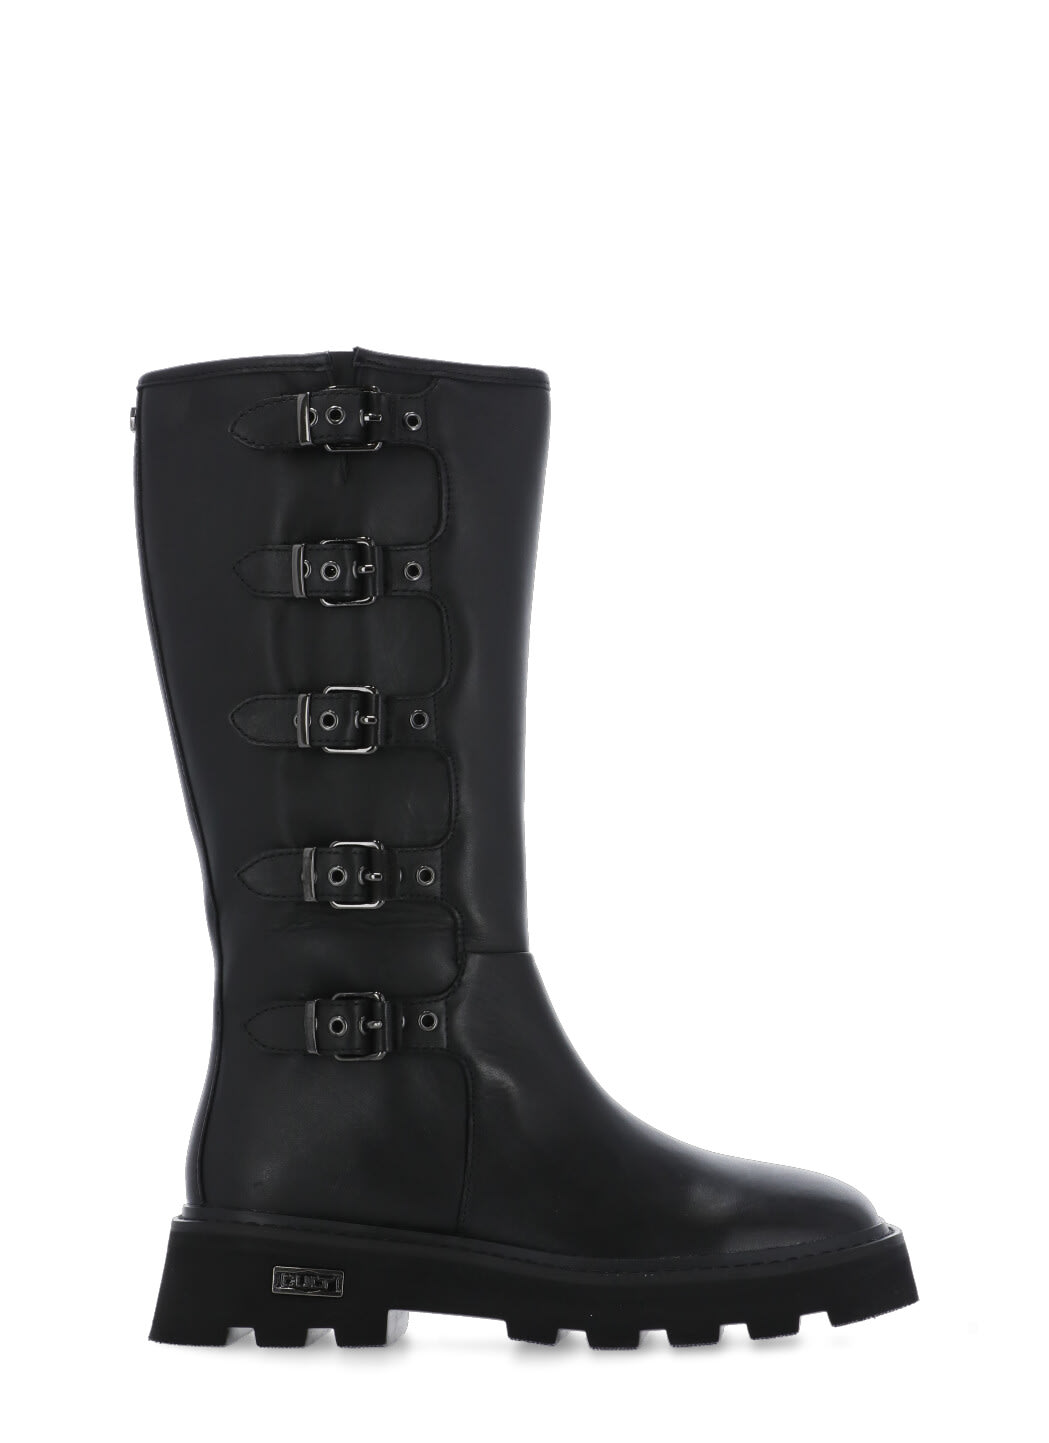 CULT SKIN 3984 BOOTS